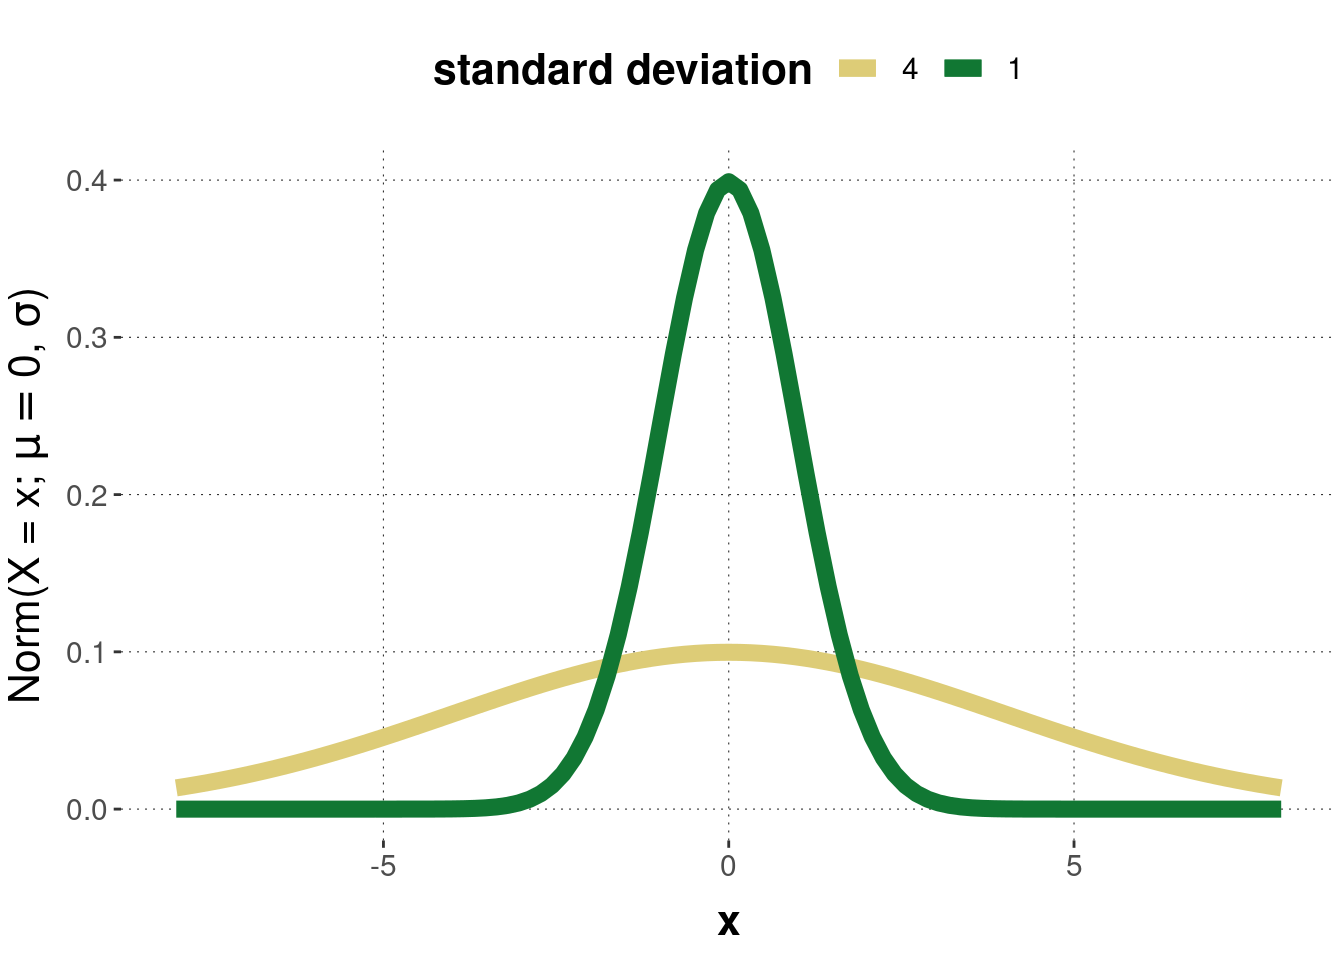 Examples of the Normal distribution. In both cases $\mu = 0$, once with $\sigma = 1$ and once with $\sigma = 4$.